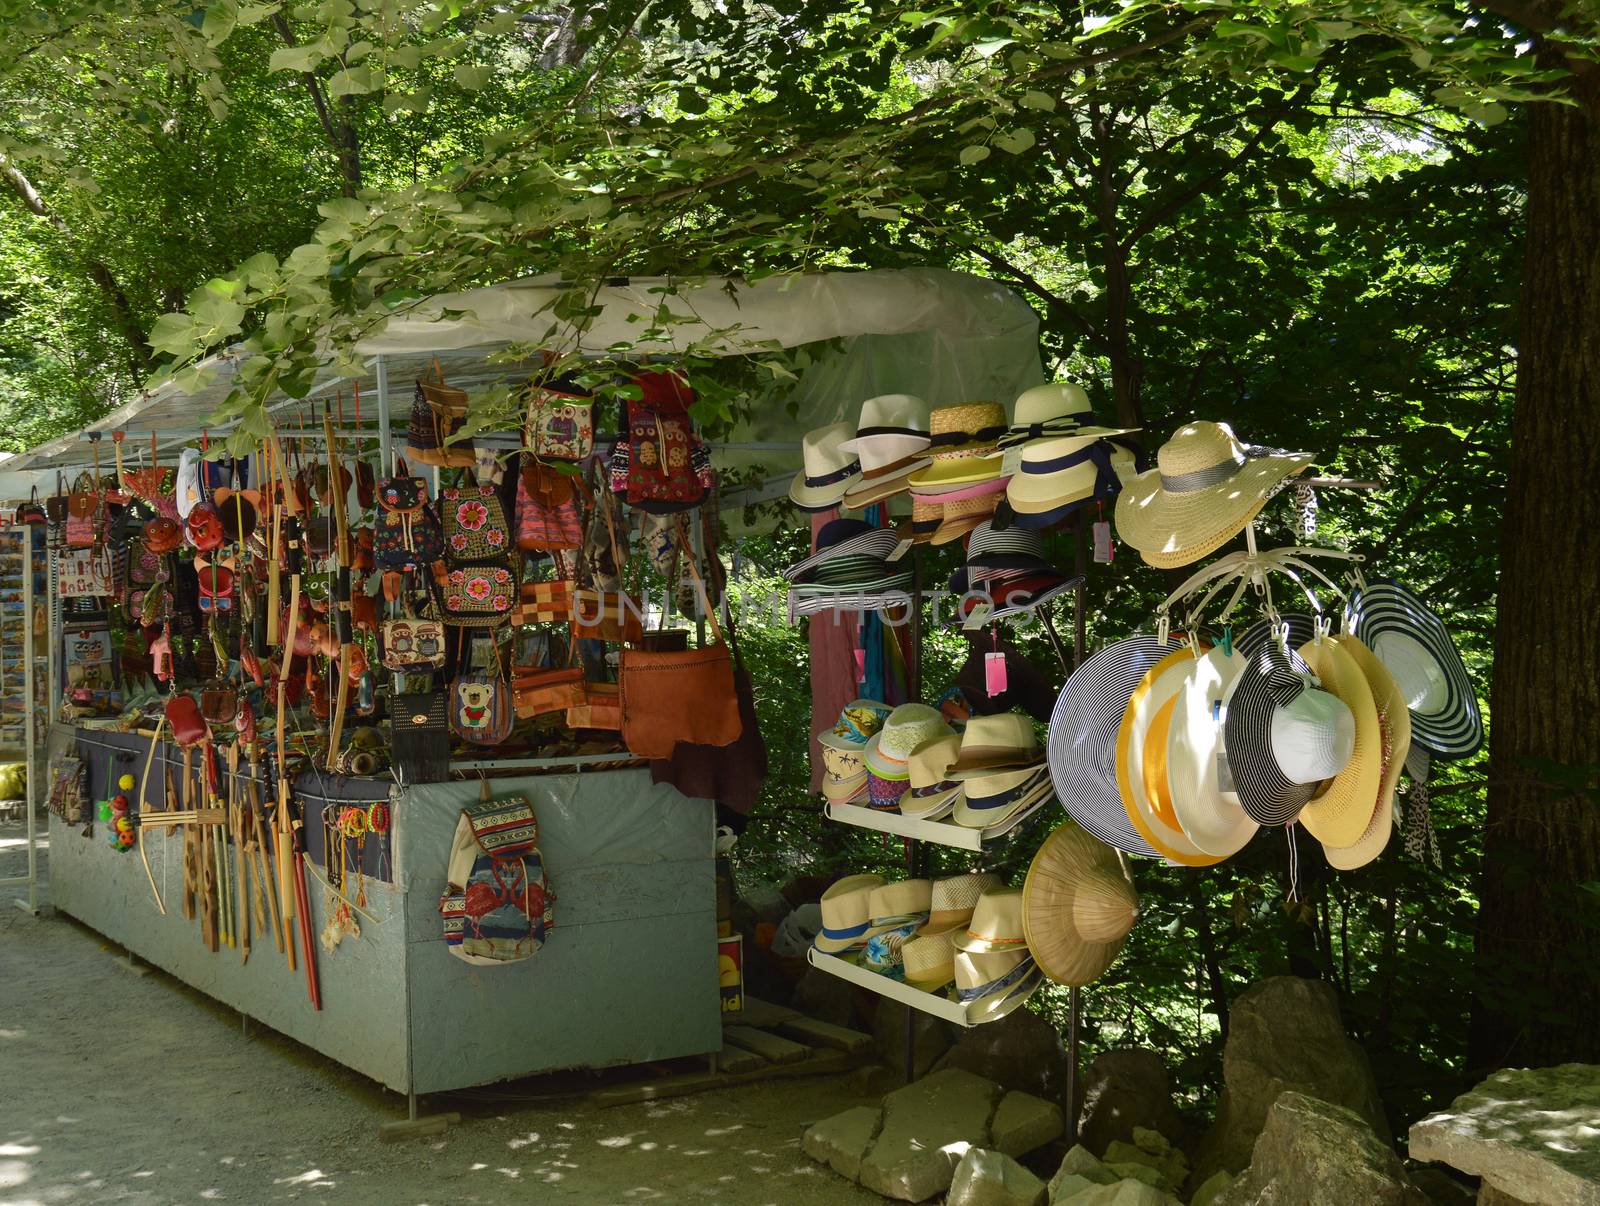 Outdoor souvenir kiosk in the Park with tourist goods hats, bags, backpacks and various accessories by claire_lucia